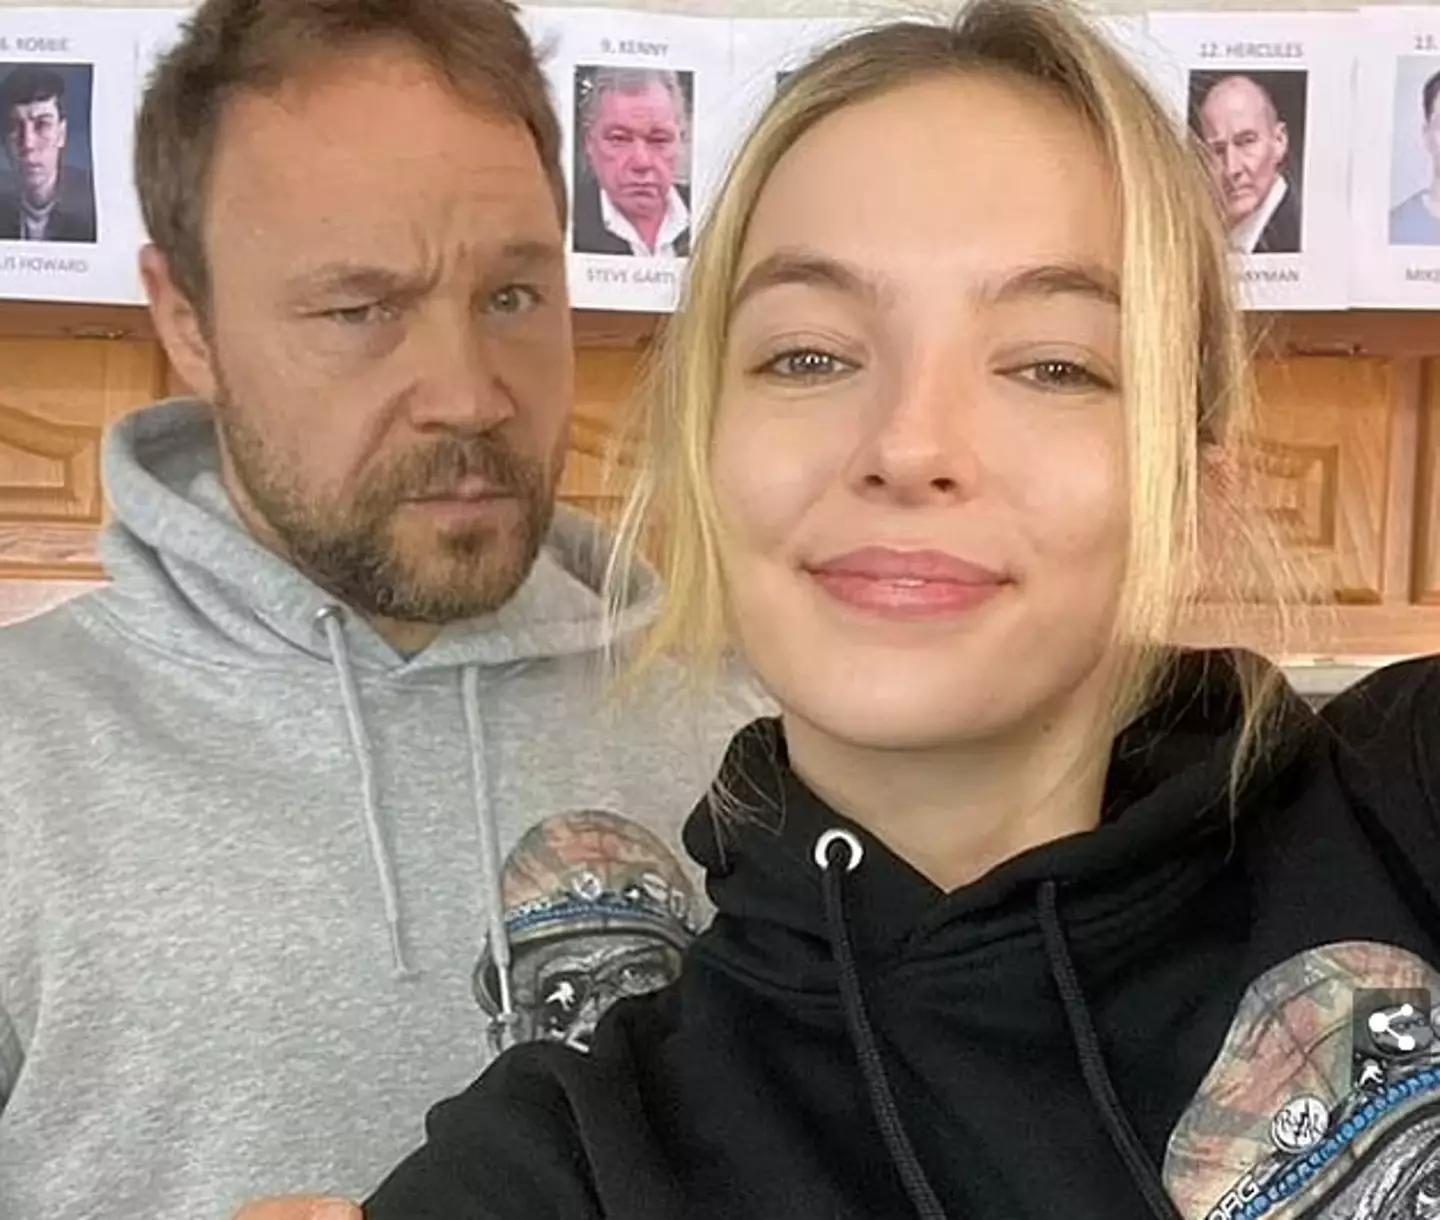 Scousers - like Jodie Comer and Stephen Graham - got the most flack for their accents (